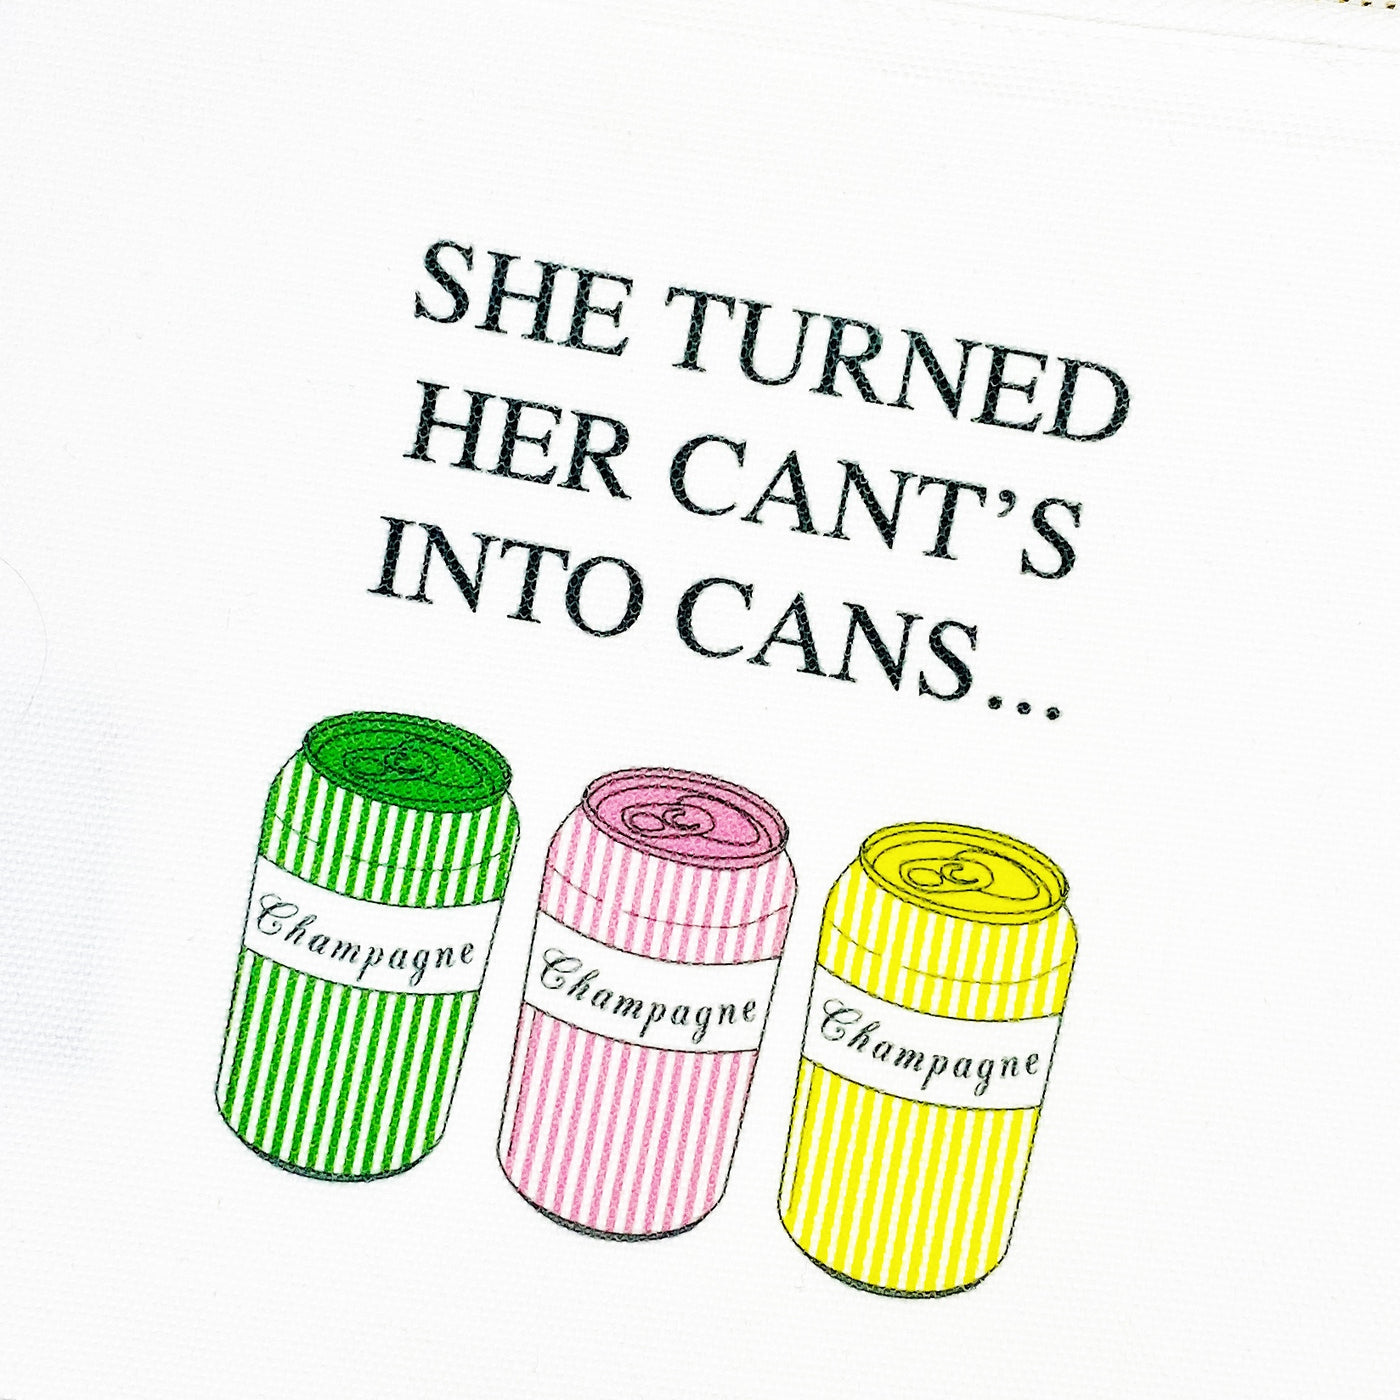 Cant's Into Cans Cosmetic Bag-Small